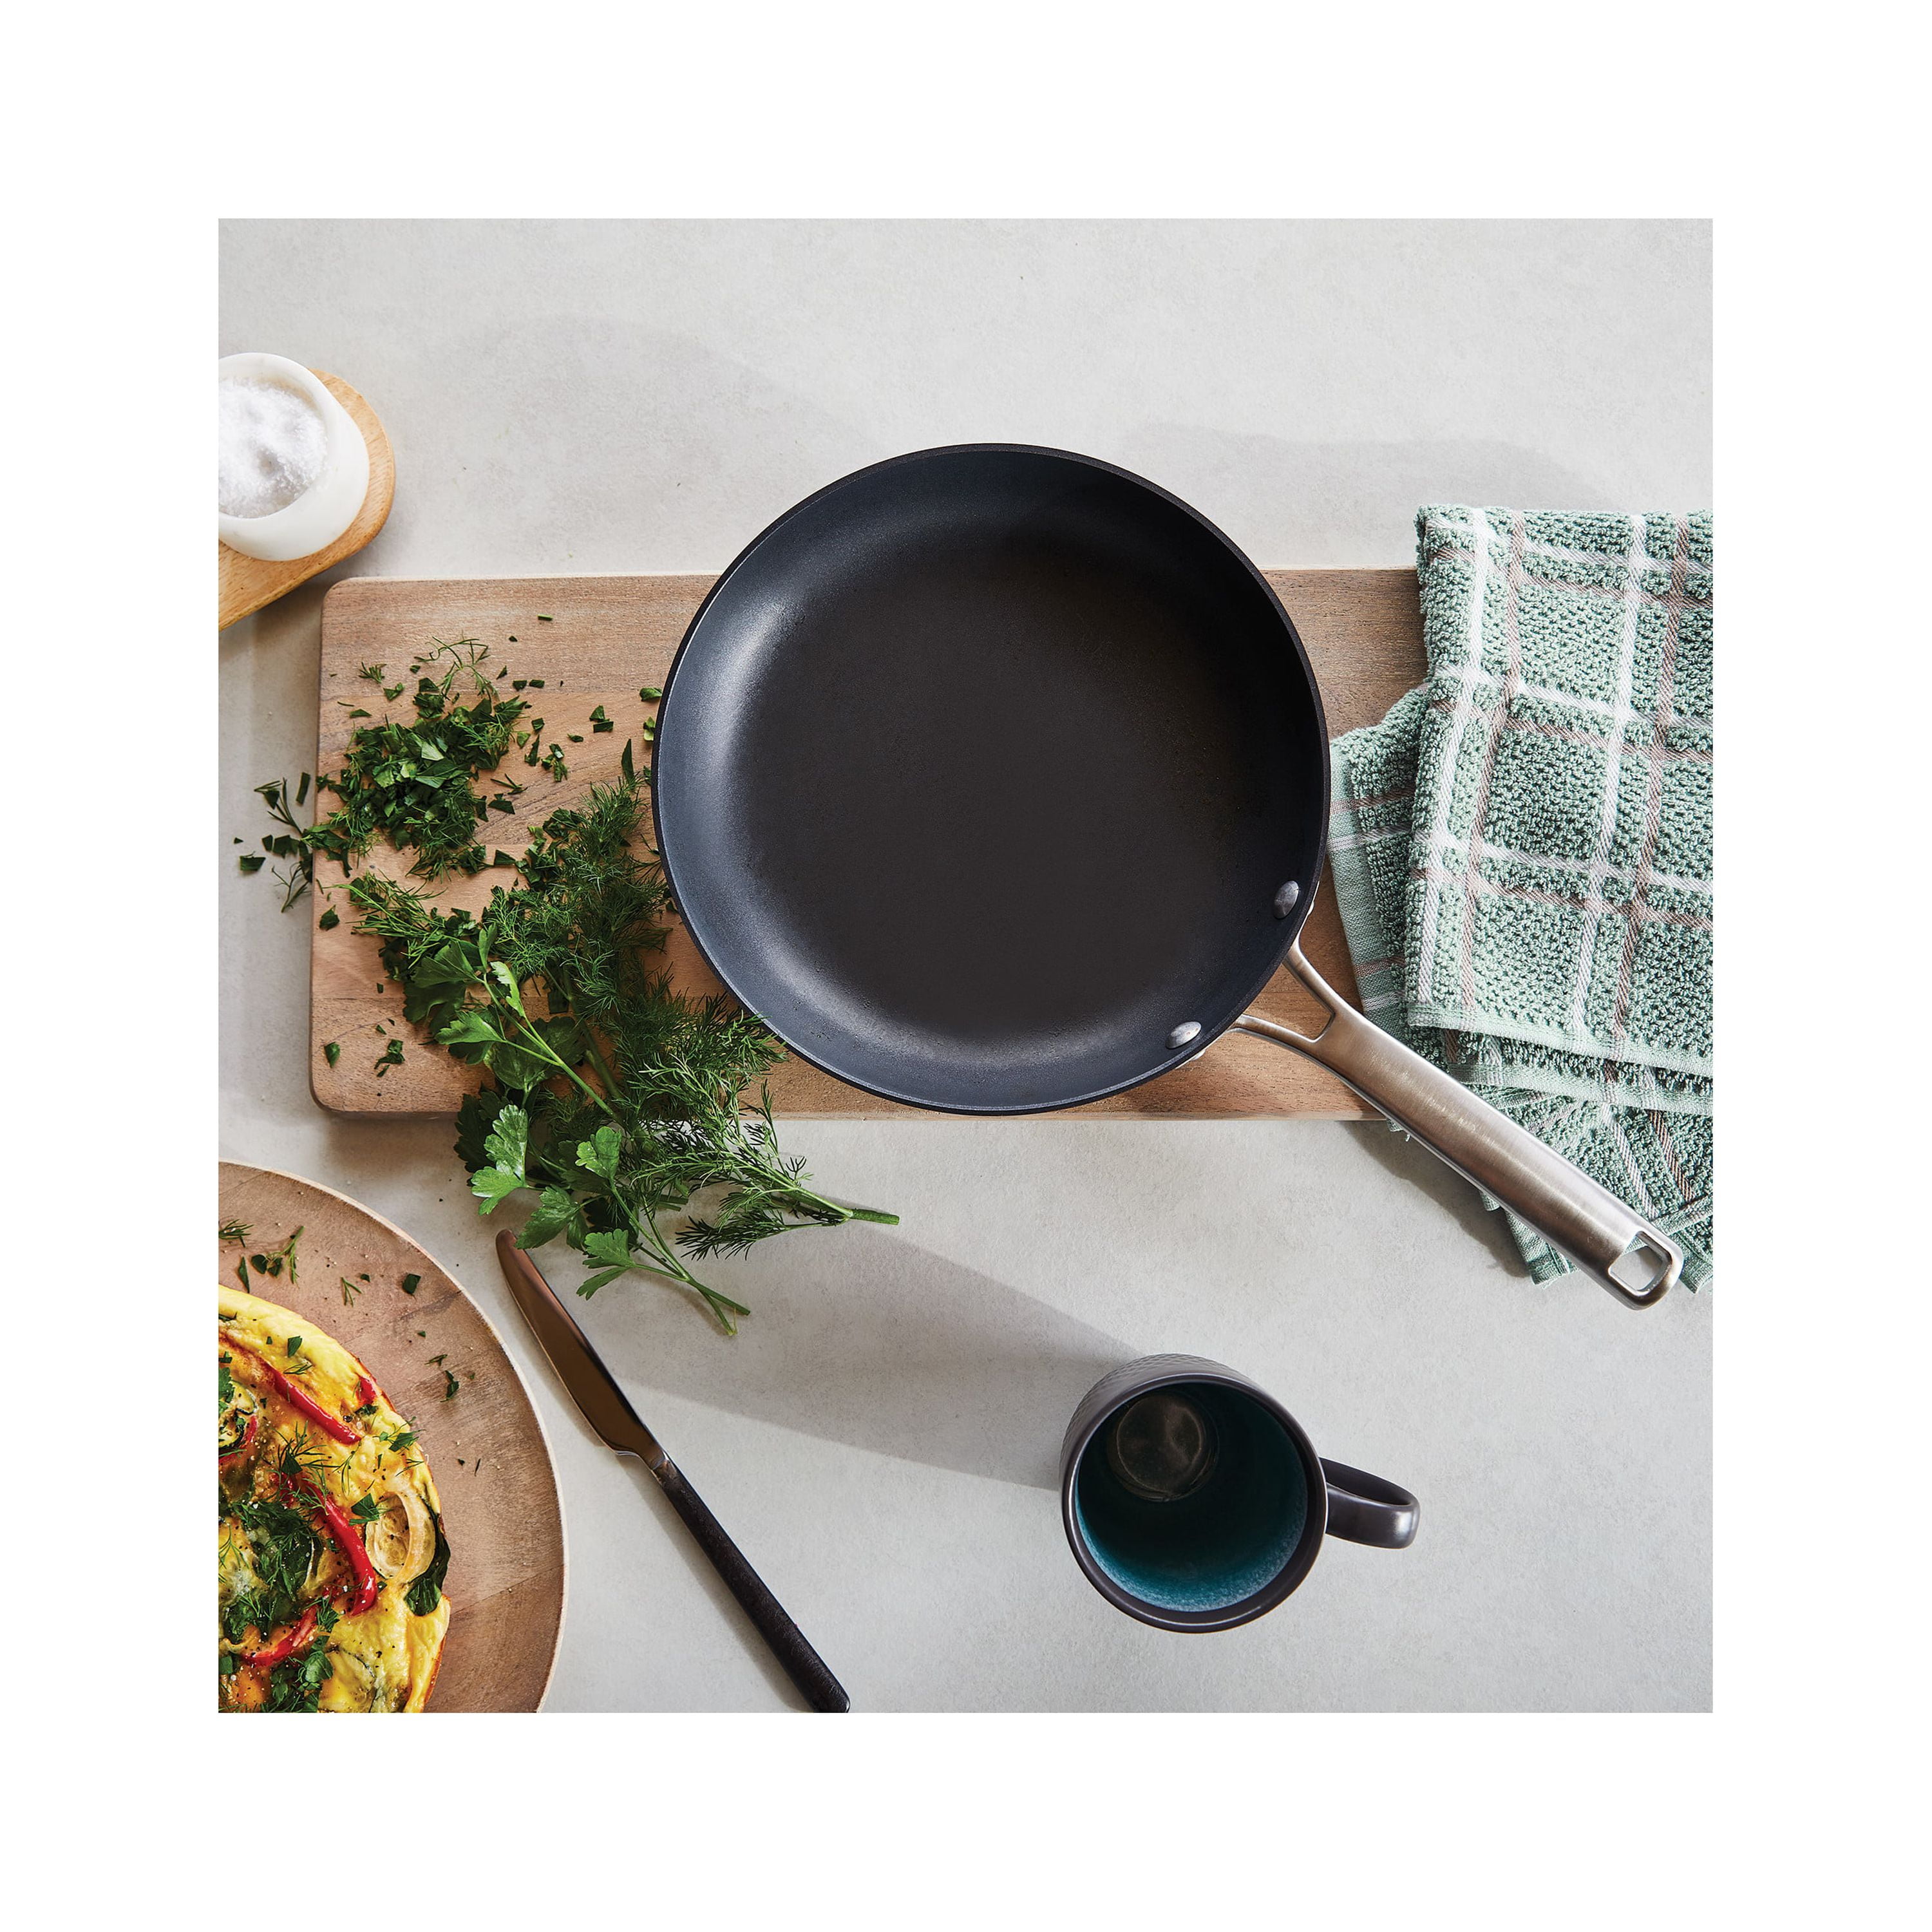 Select by Calphalon Nonstick with AquaShield 12 Fry Pan